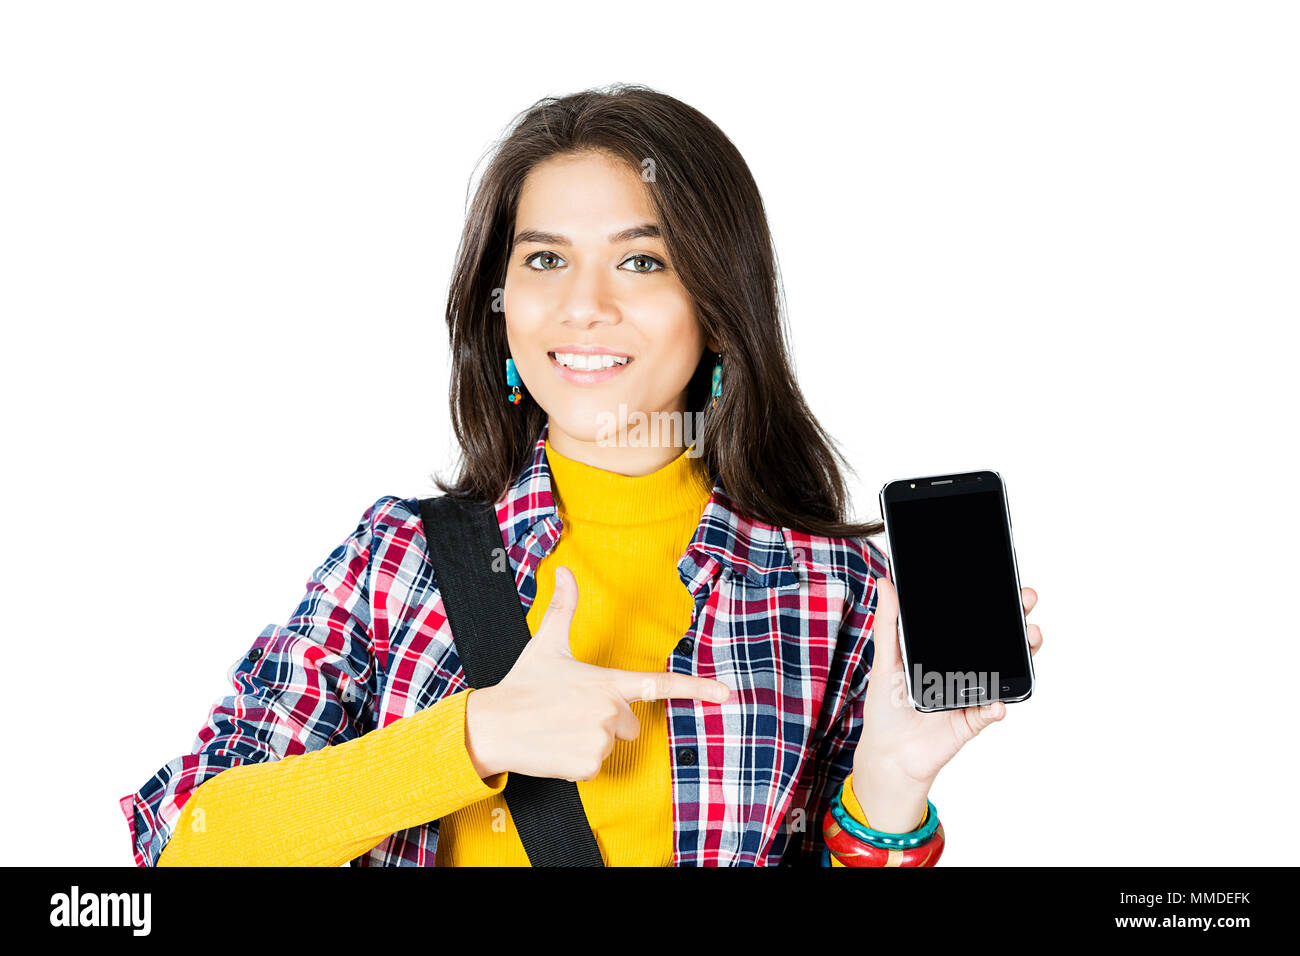 One Young Woman College Student Using Smartphone And Showing Thumbs-up Success Stock Photo